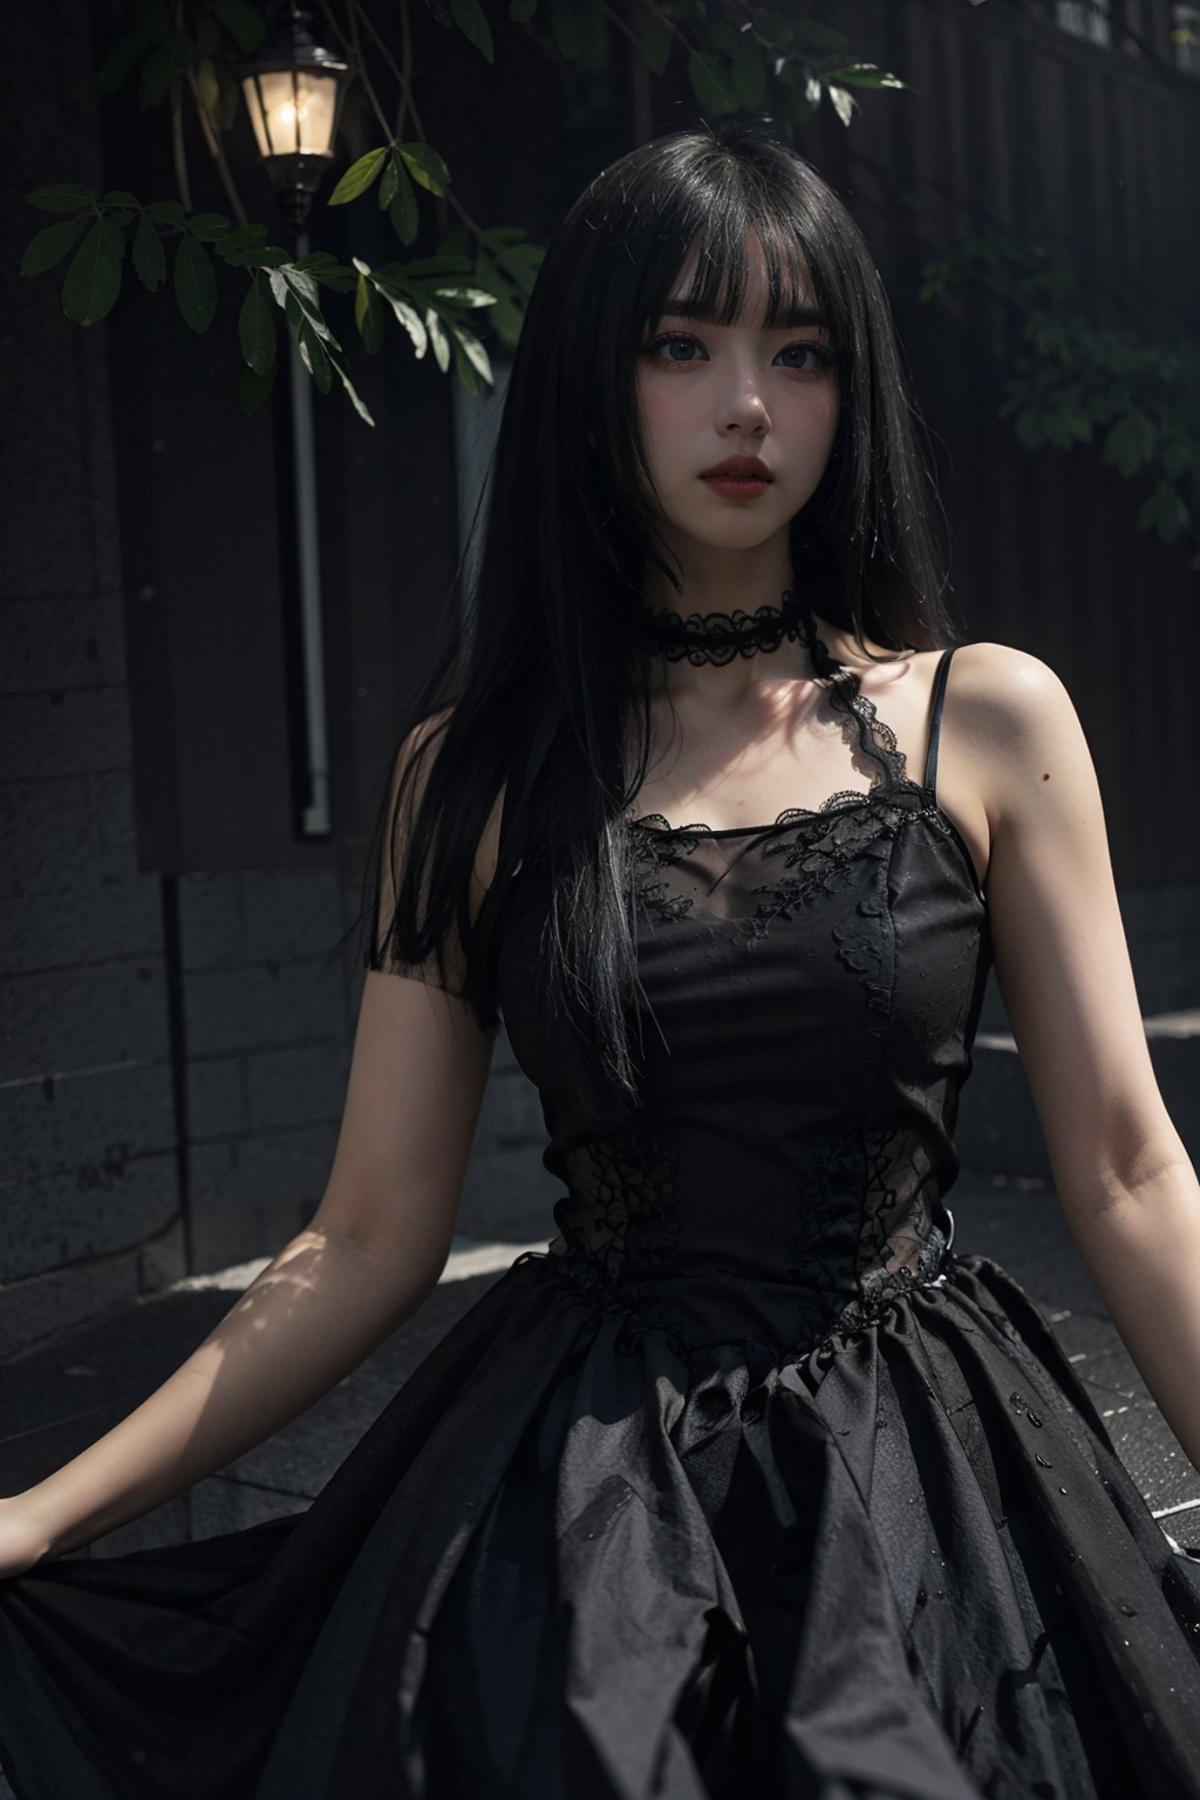 Dark style Dress image by pizzagirl